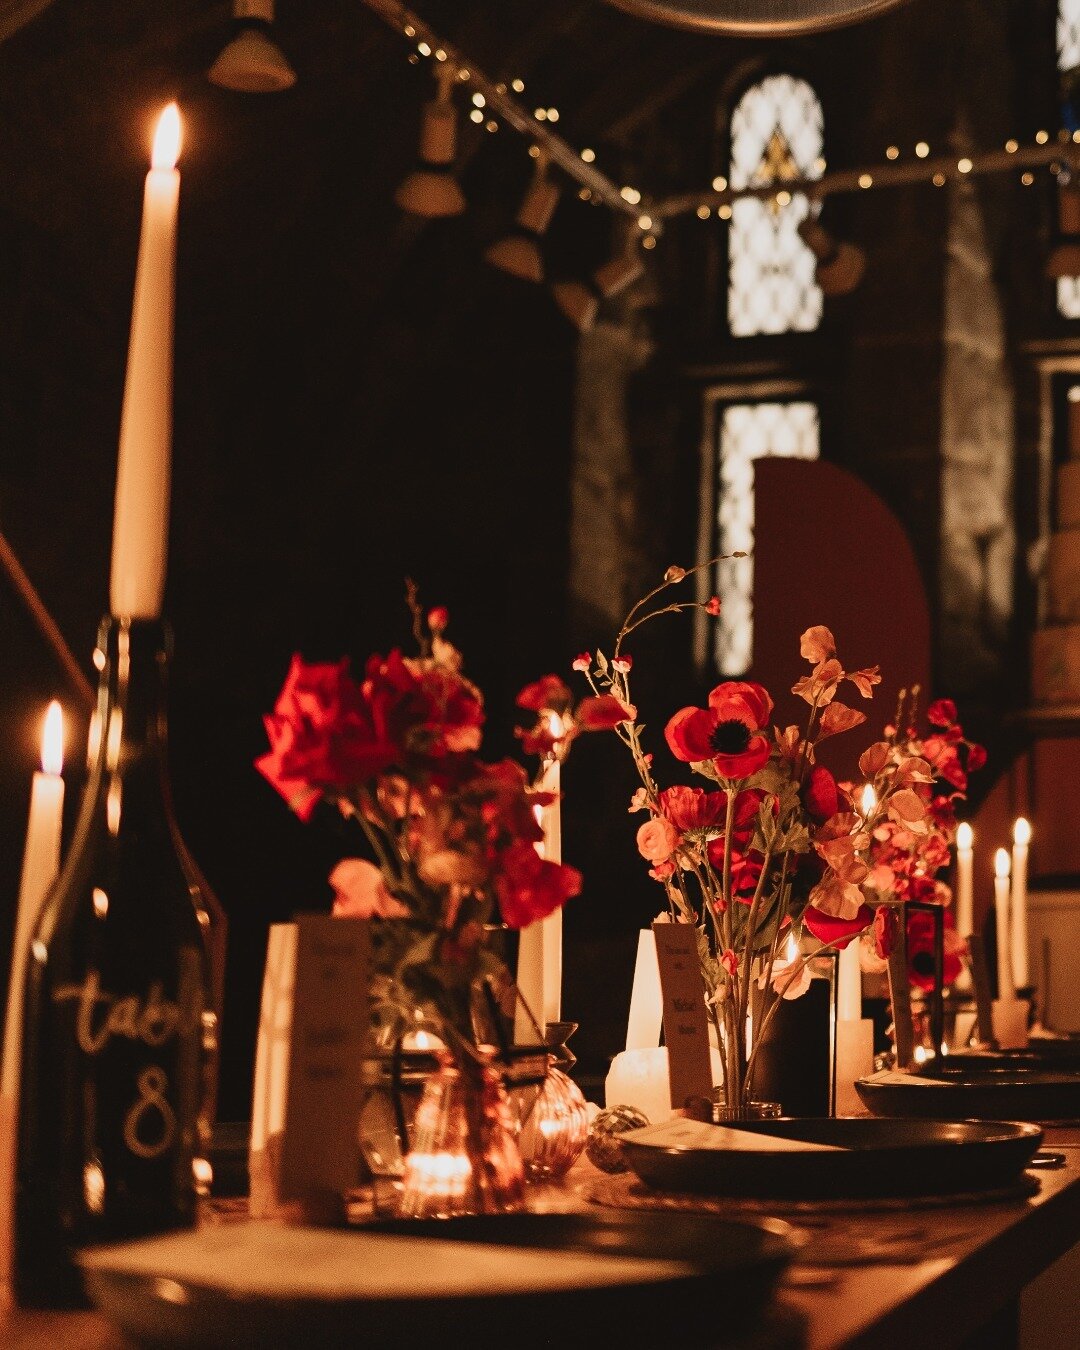 Love and creativity intertwined at the Art House Cafe's open evening in the crypts! 💍✨ 

I can&rsquo;t wait to work here in the future creating intimate &amp; unique set ups 😍

@arthouse.cafe 
@sarahbrookesphotography 
@thecheshirewildbunch 
@bouqu